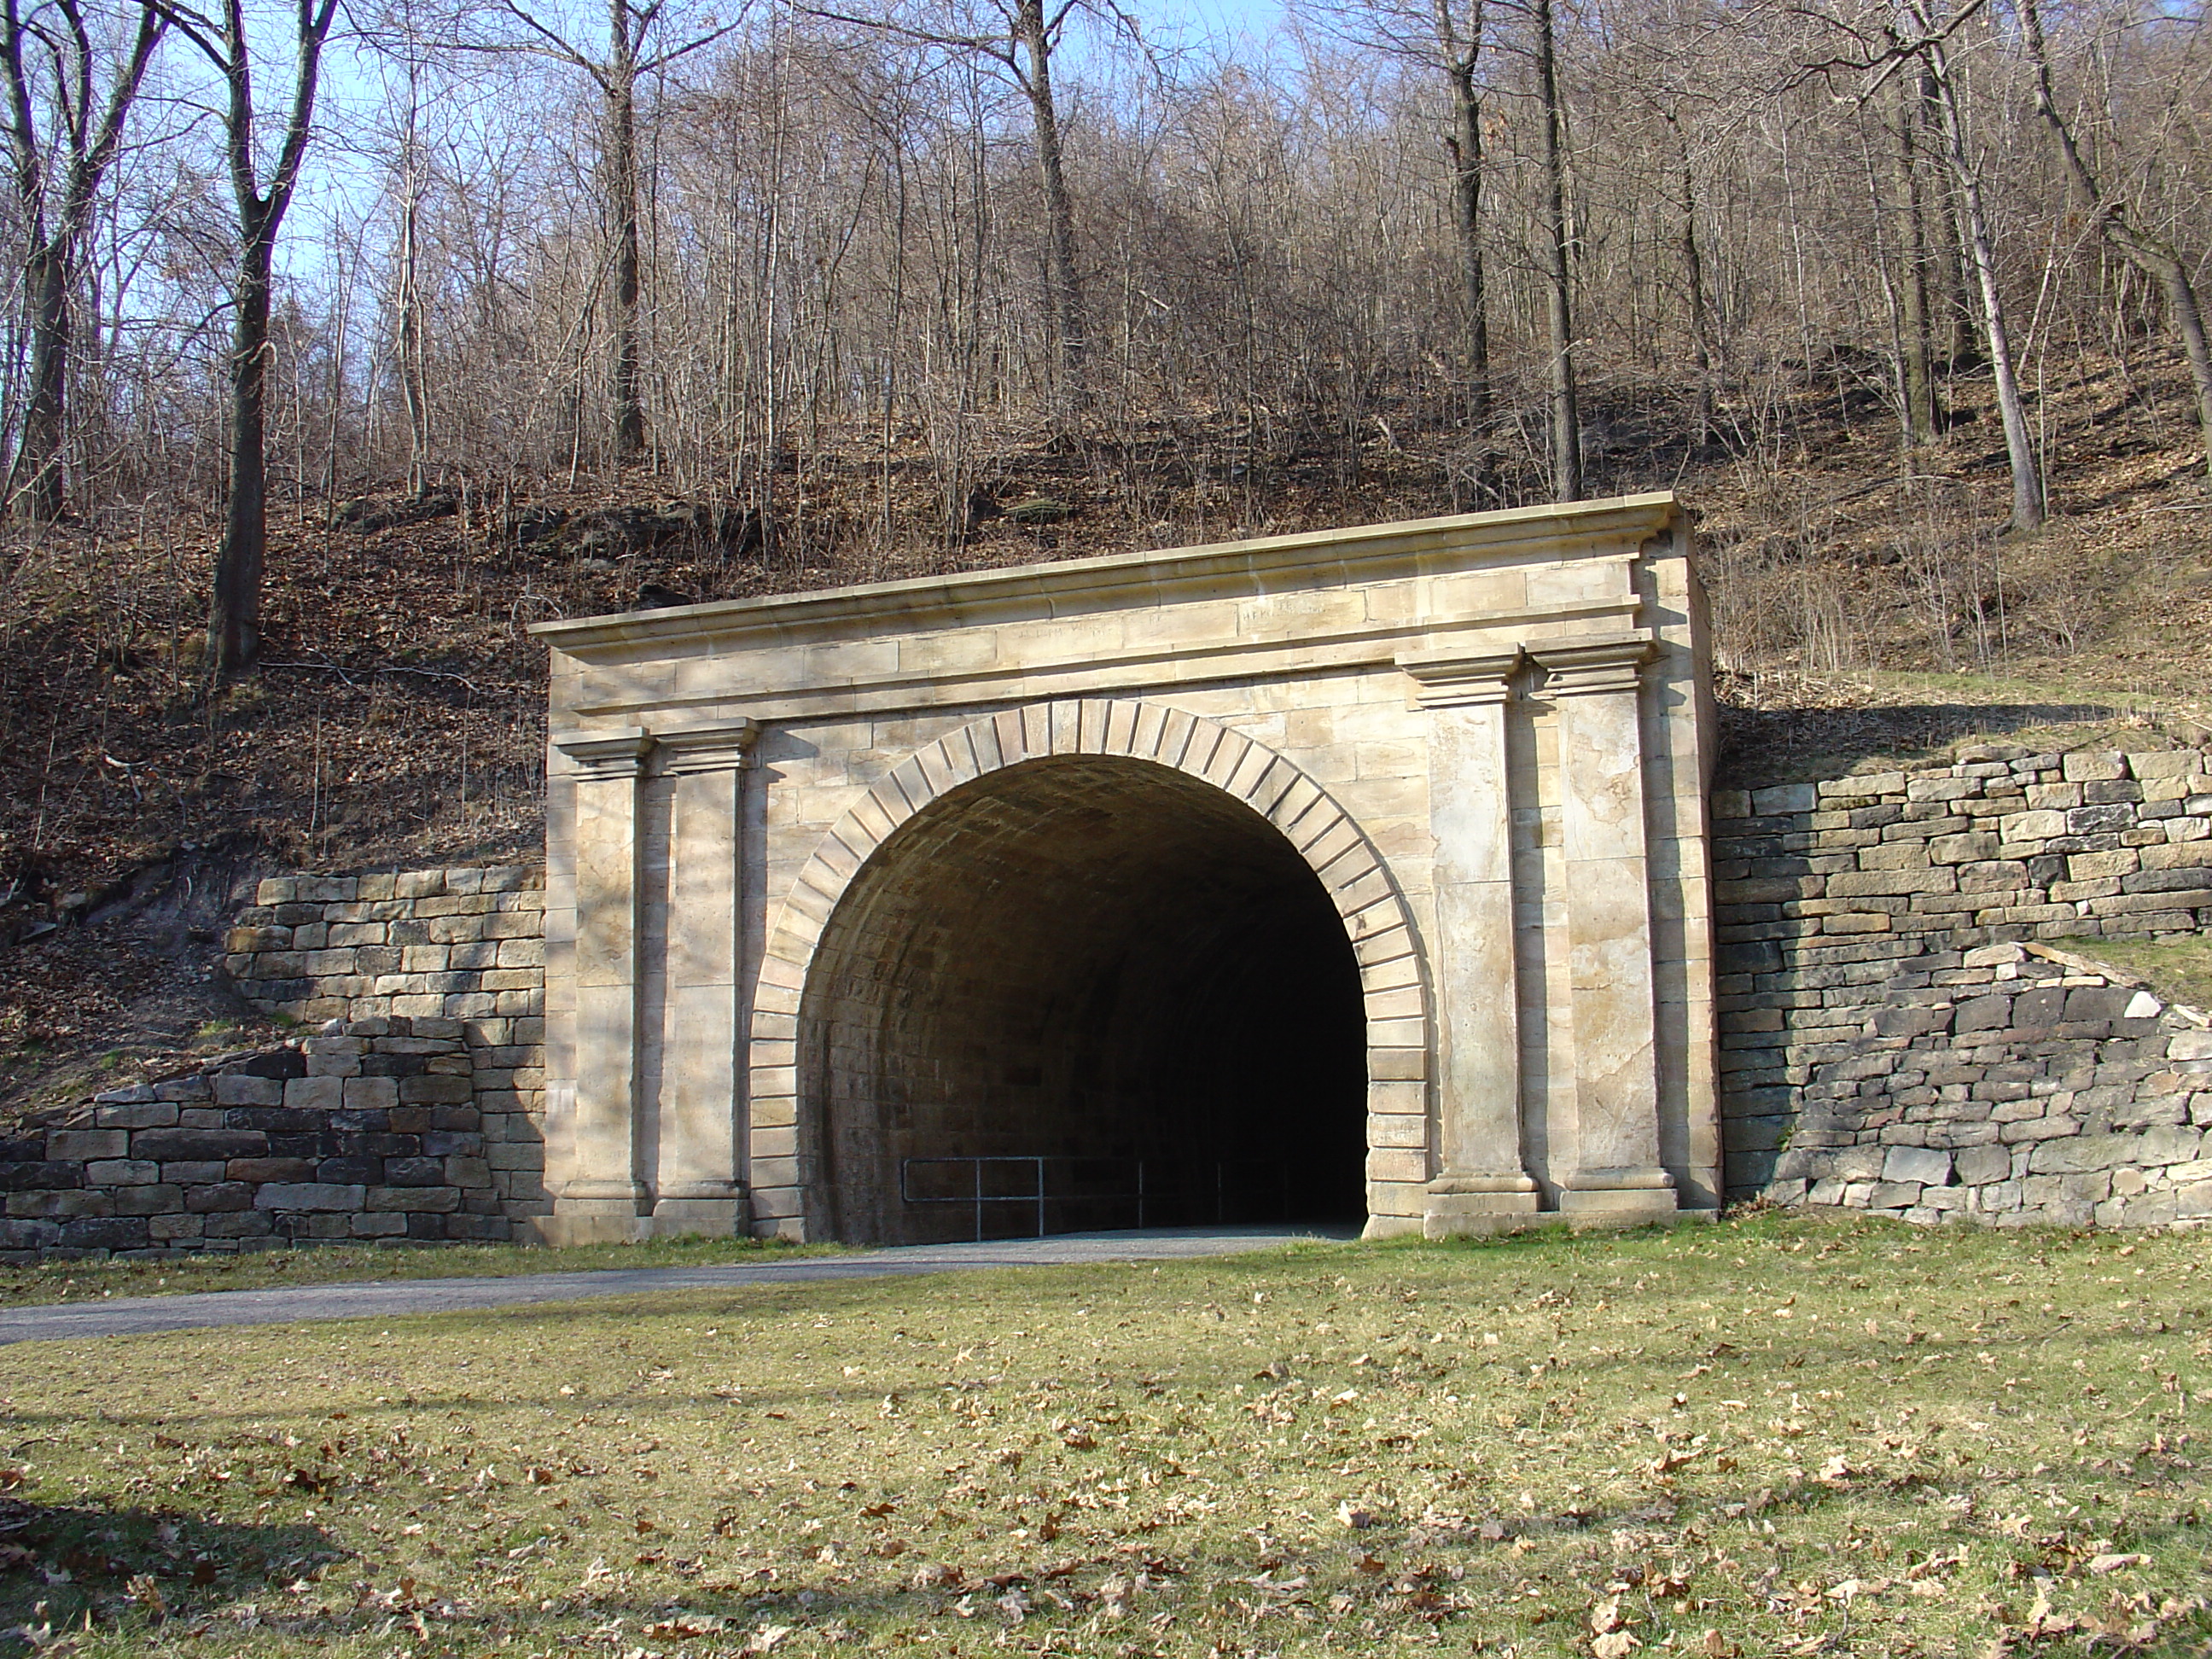 Staple Bend Tunnel - Allegheny Portage Railroad National Historic